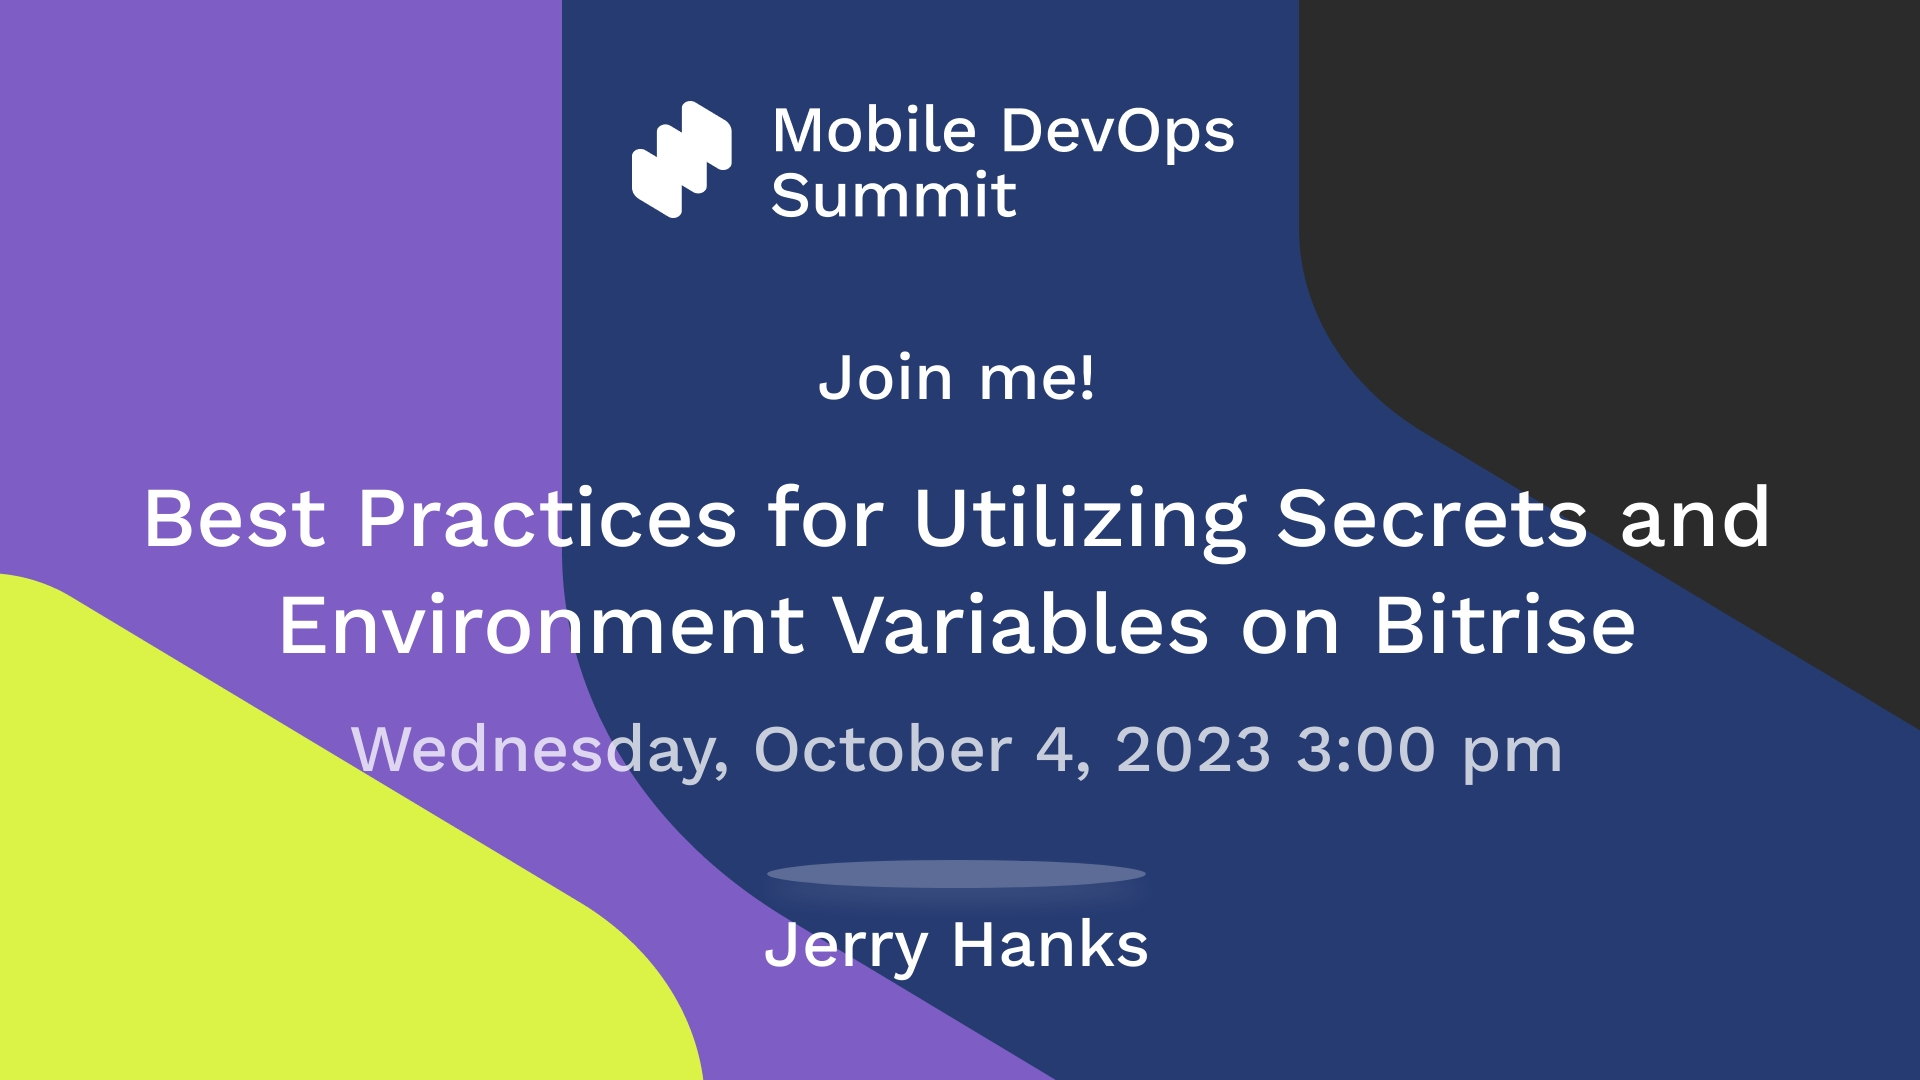 Best Practices for Utilizing Secrets and Environment Variables on Bitrise